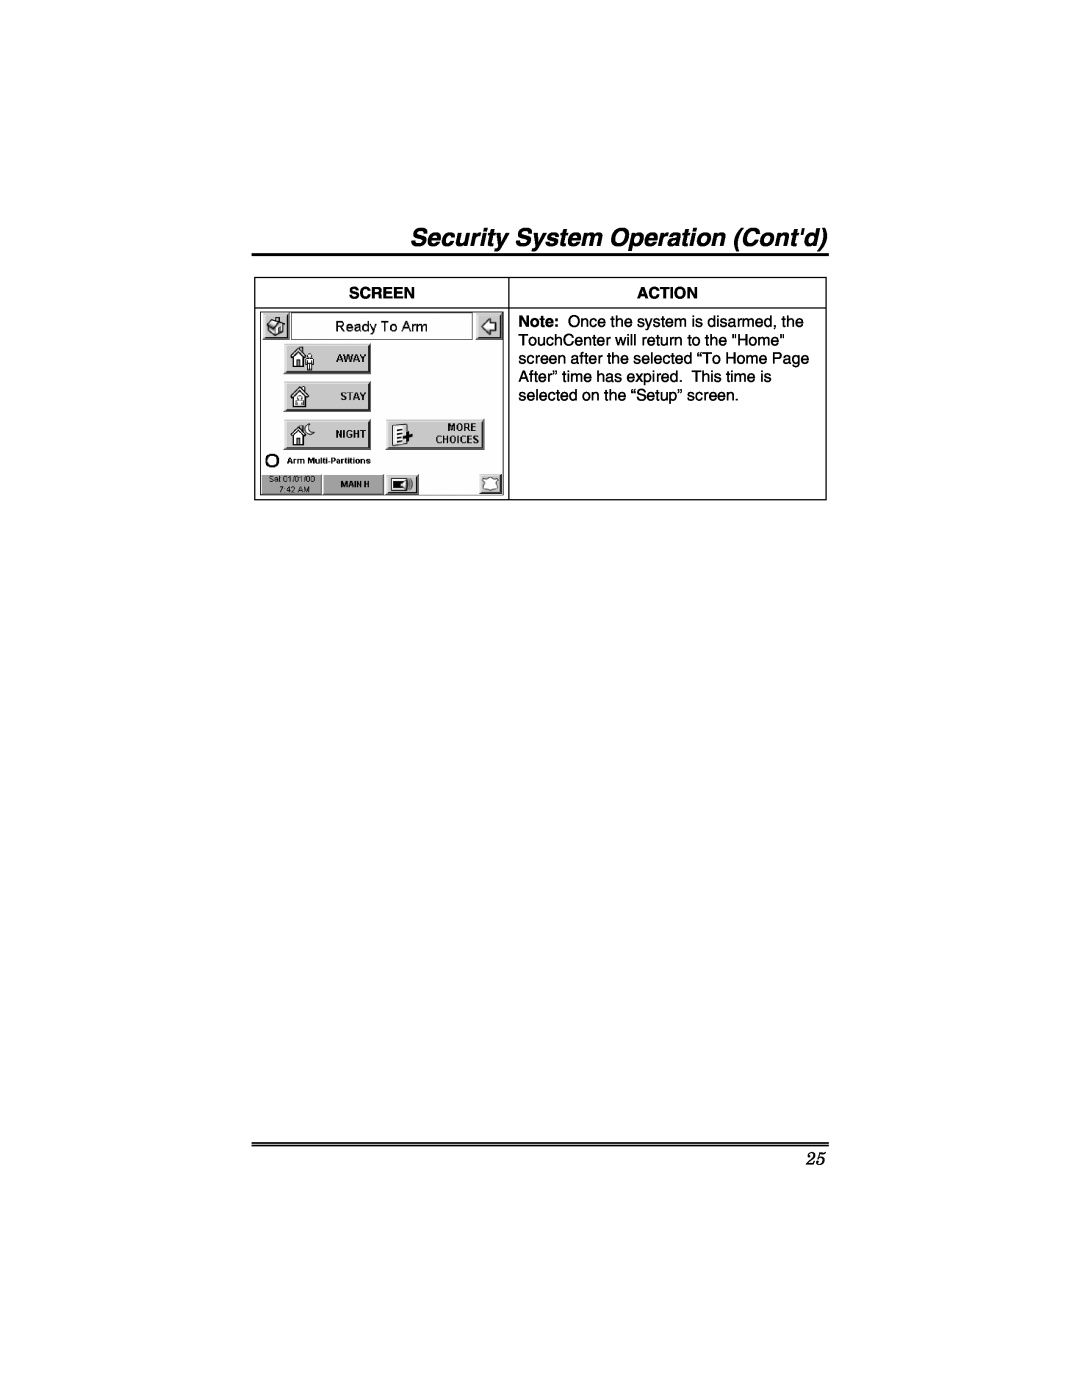 Honeywell 6271V manual Security System Operation Contd, Screen, Action 